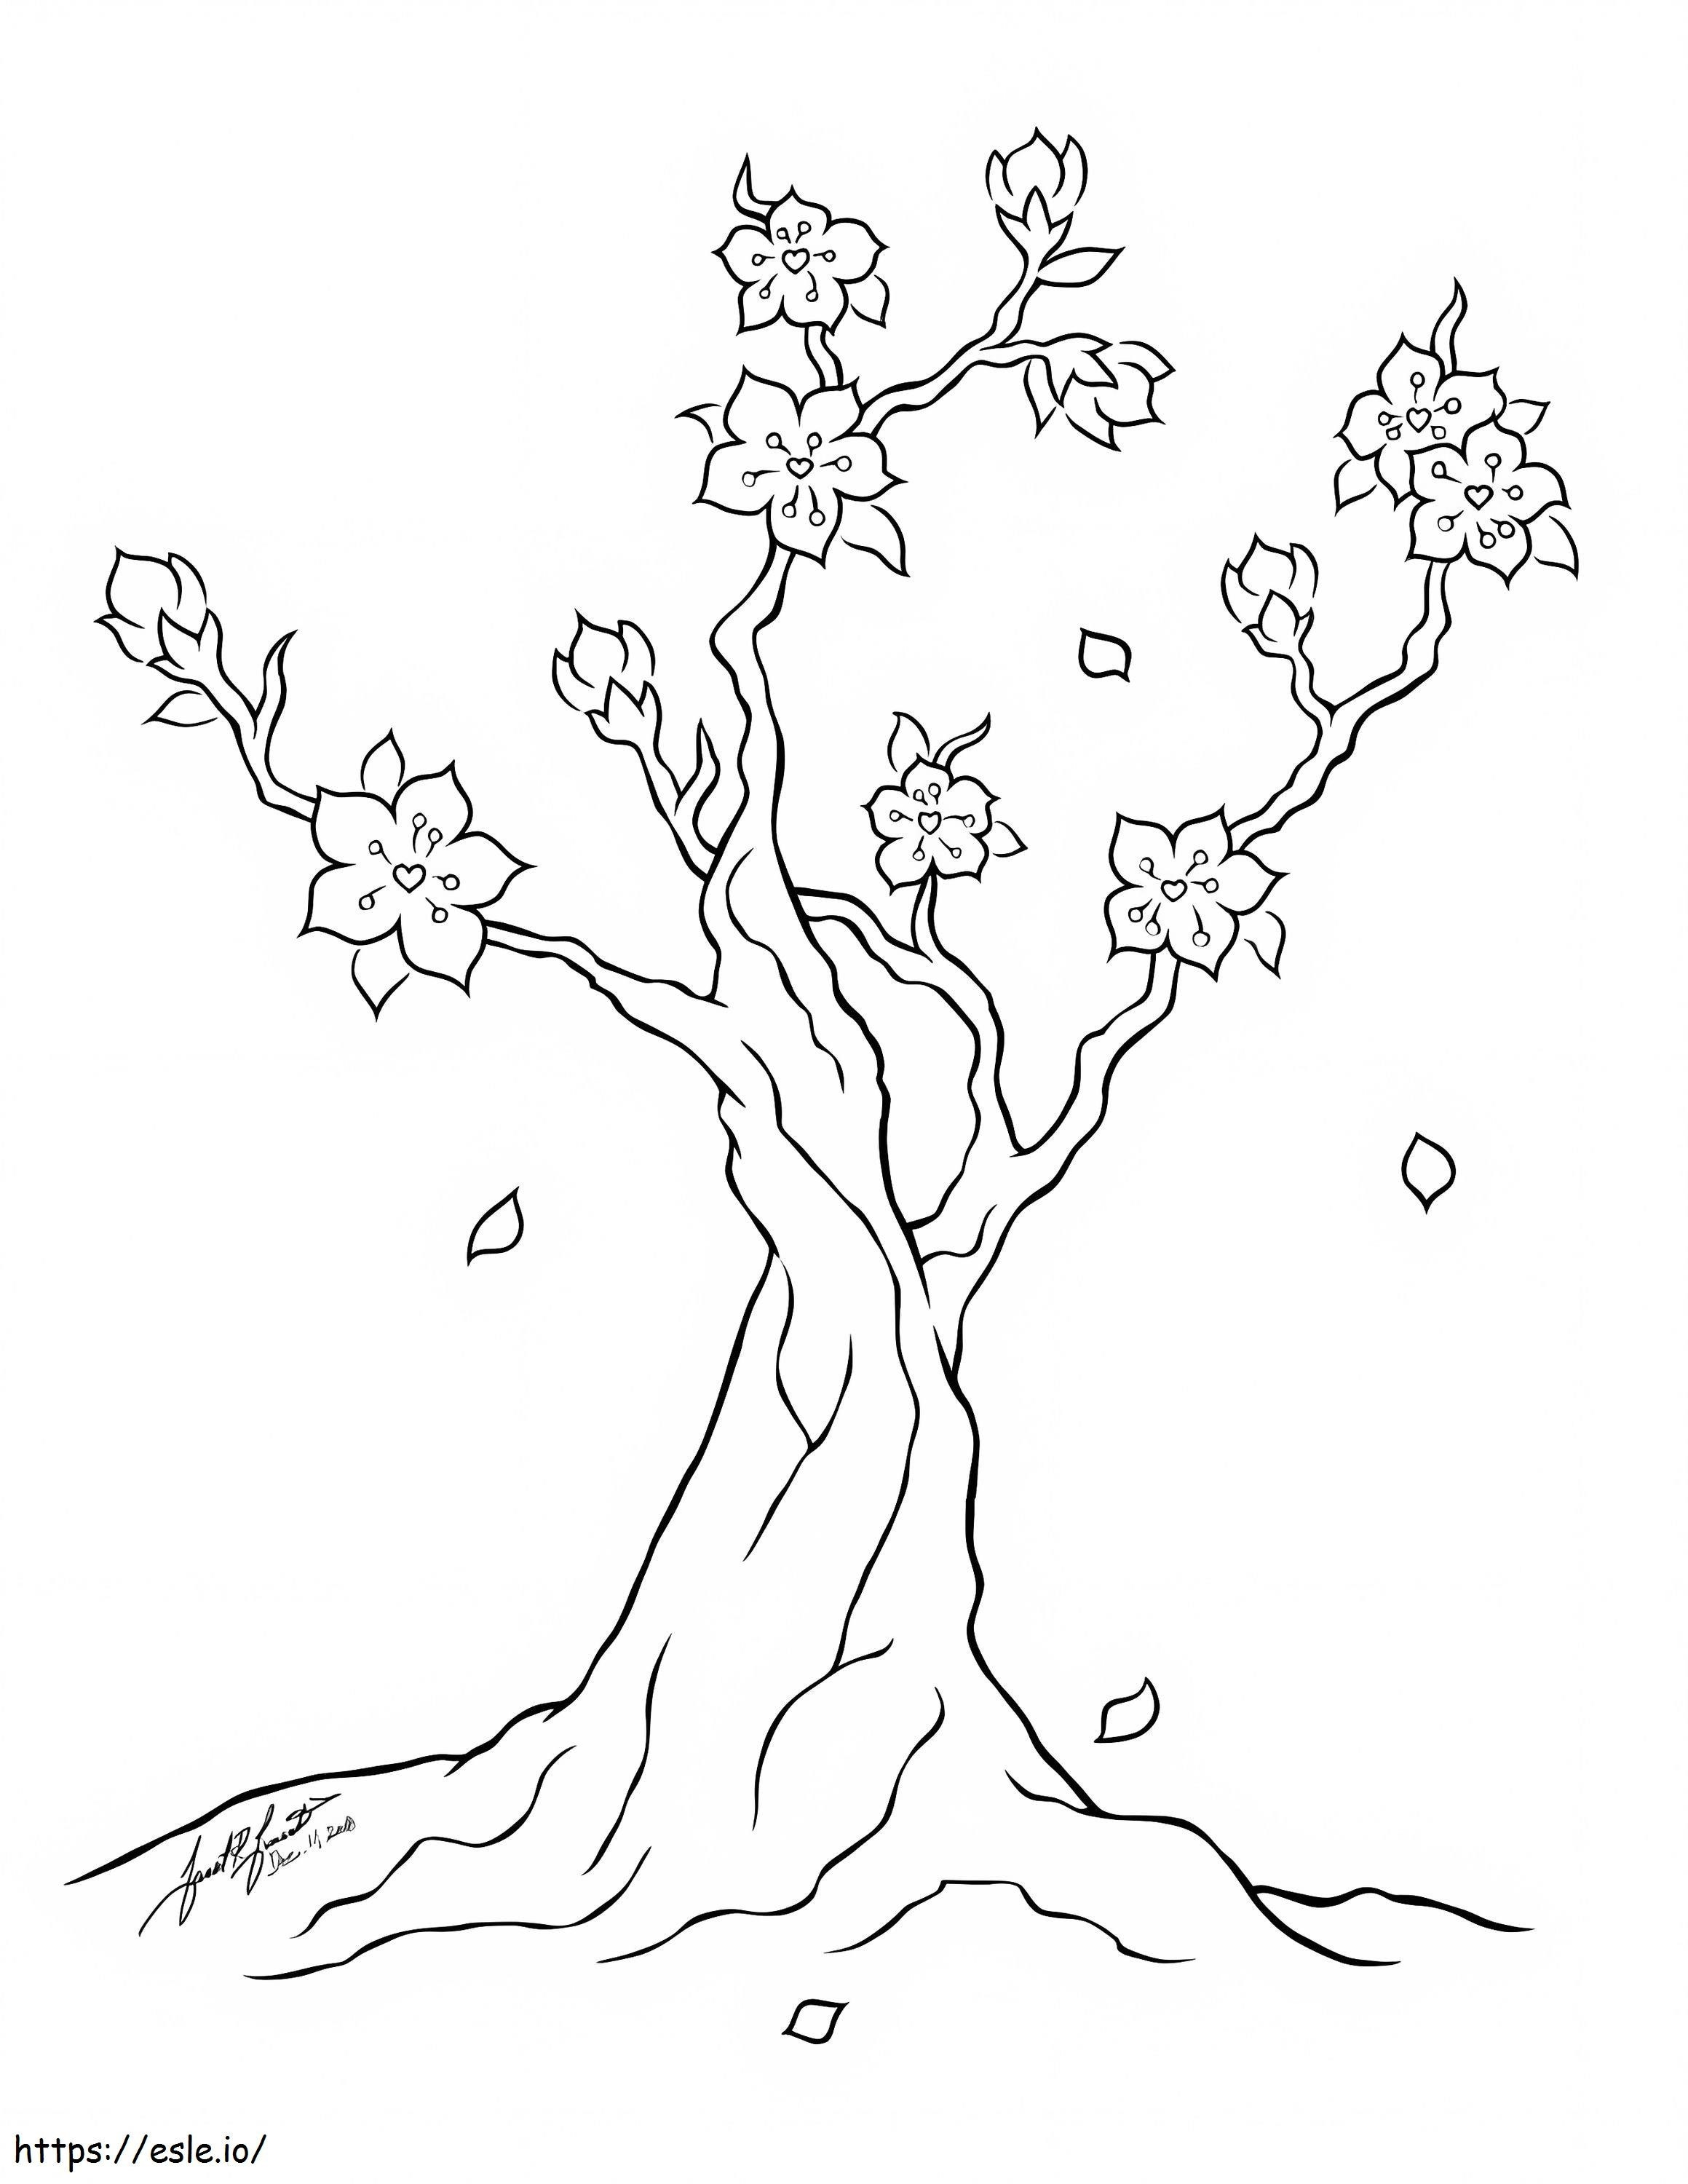 Simple Cherry Blossom Tree coloring page